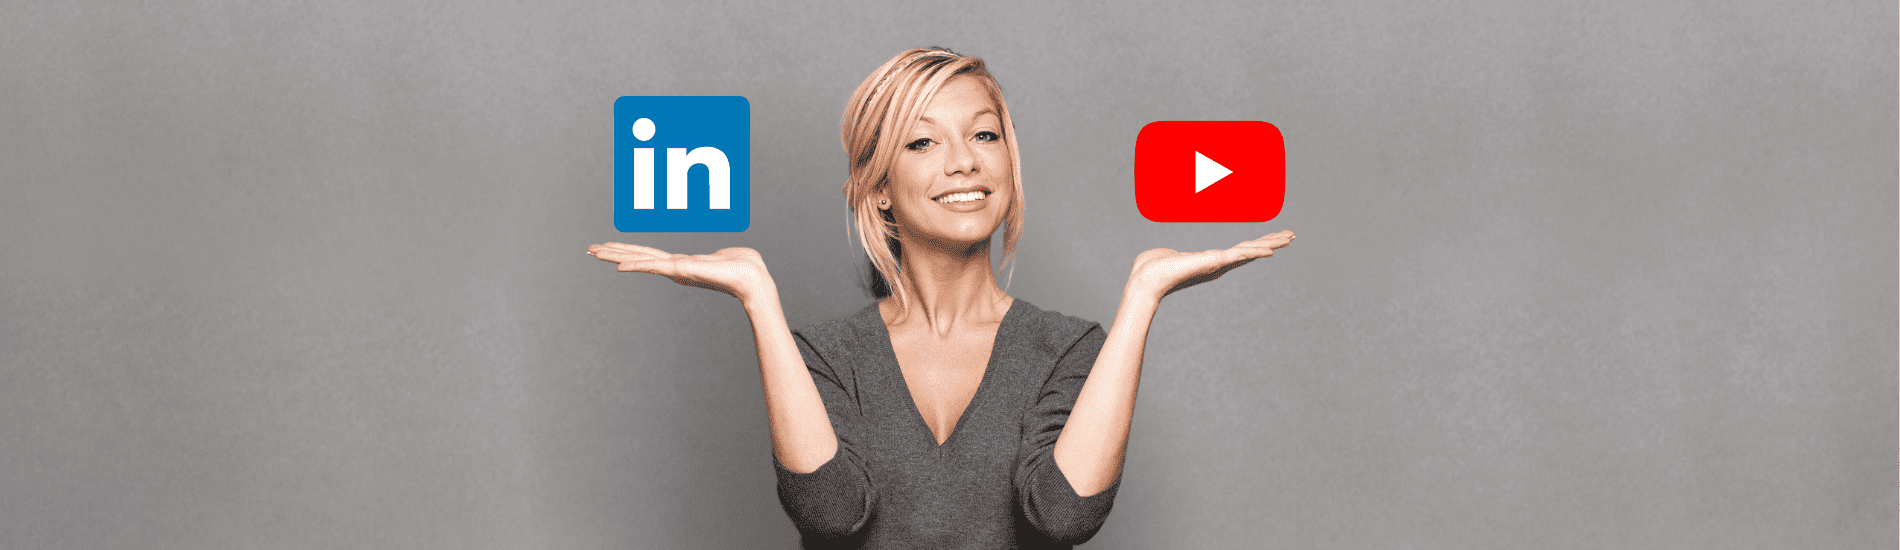 iSS Blog 3 - LinkedIn vs. YouTube_ What is the Ultimate Marketing Platform for Small Consulting Firms_